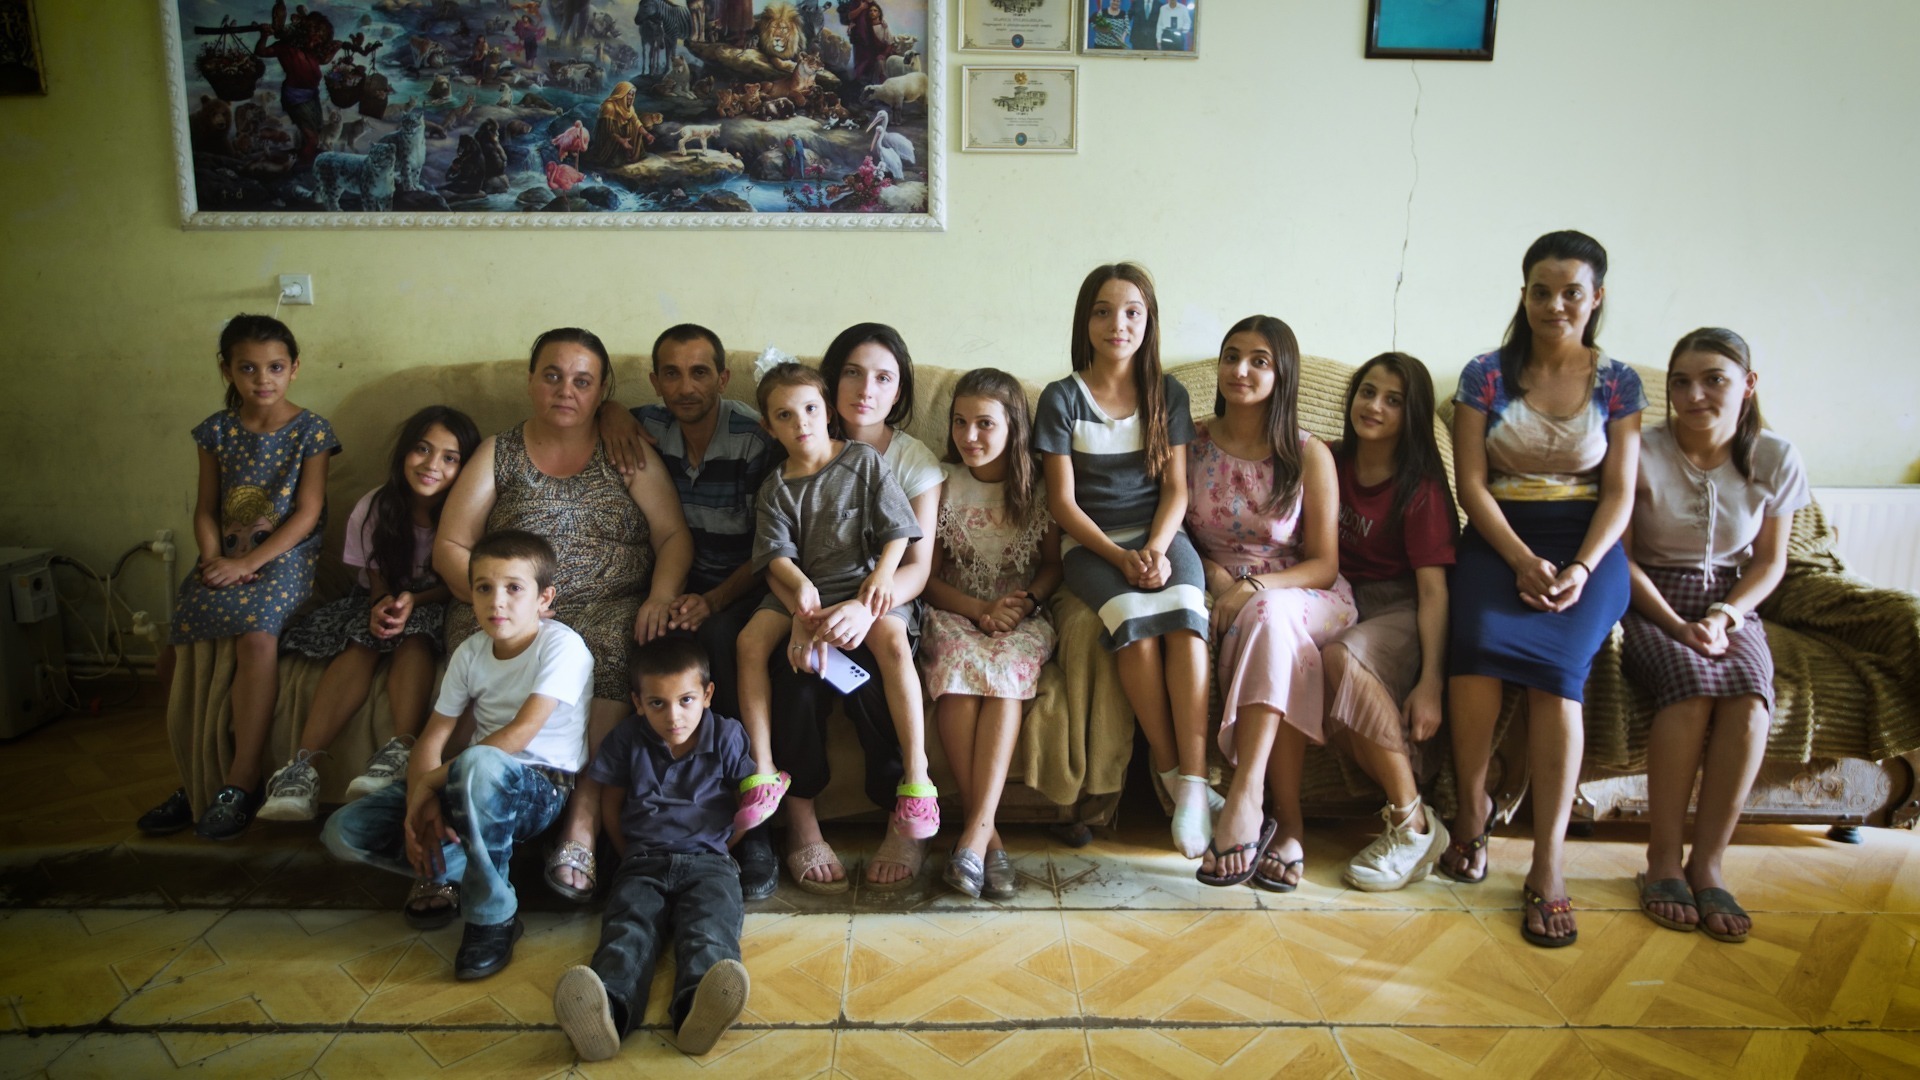 15 Children and Counting: The Story of the Melkonyan Family